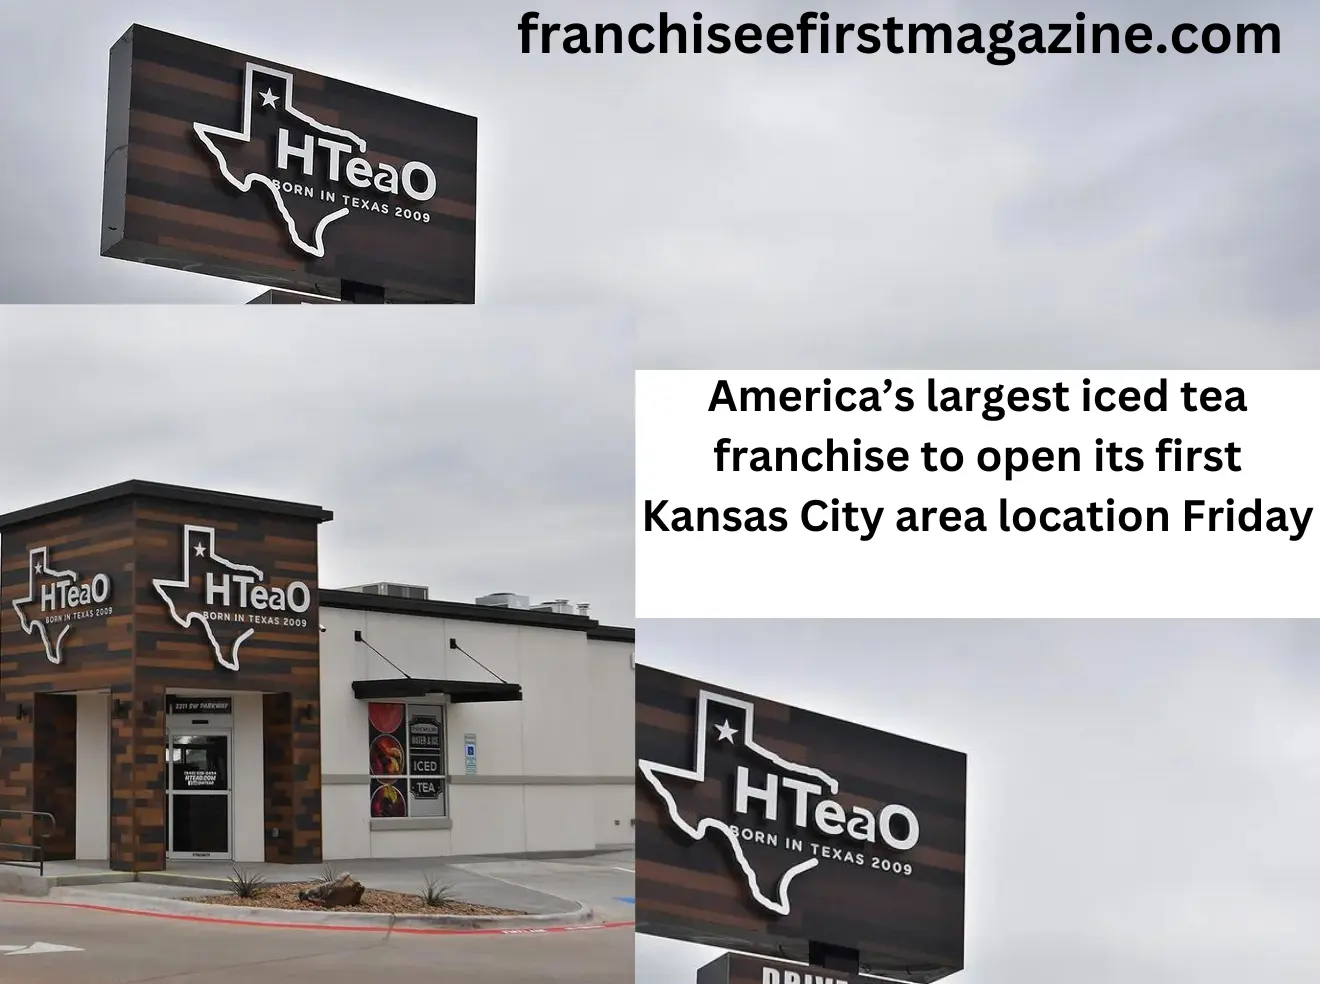 America’s largest iced tea franchise to open its first Kansas City area location Friday